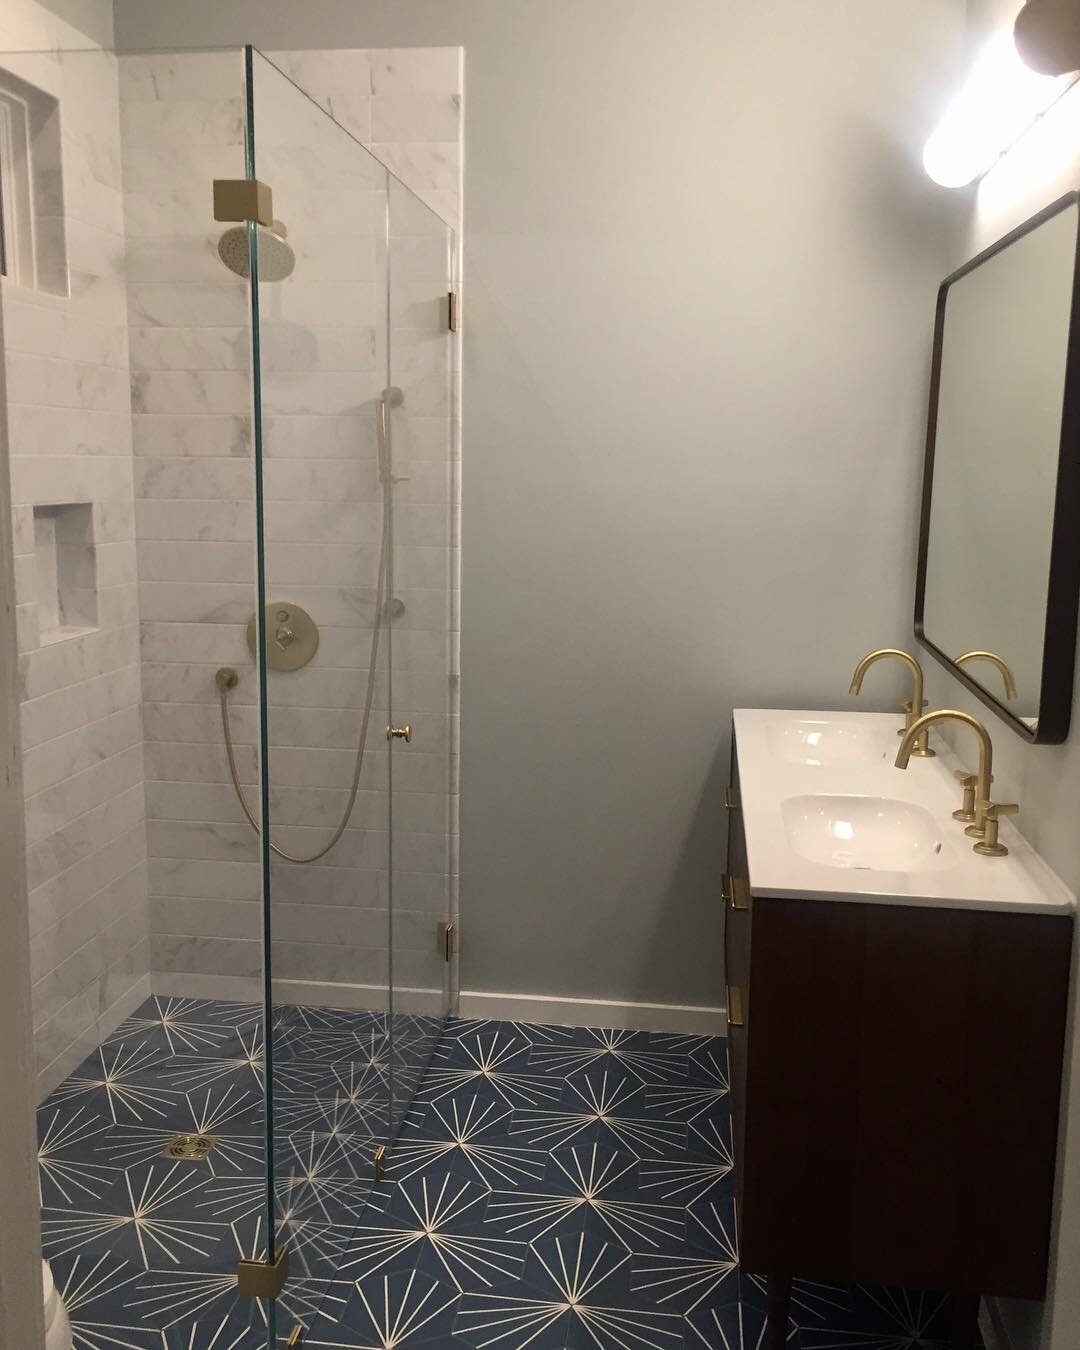 Walk-In shower + nook for the win!